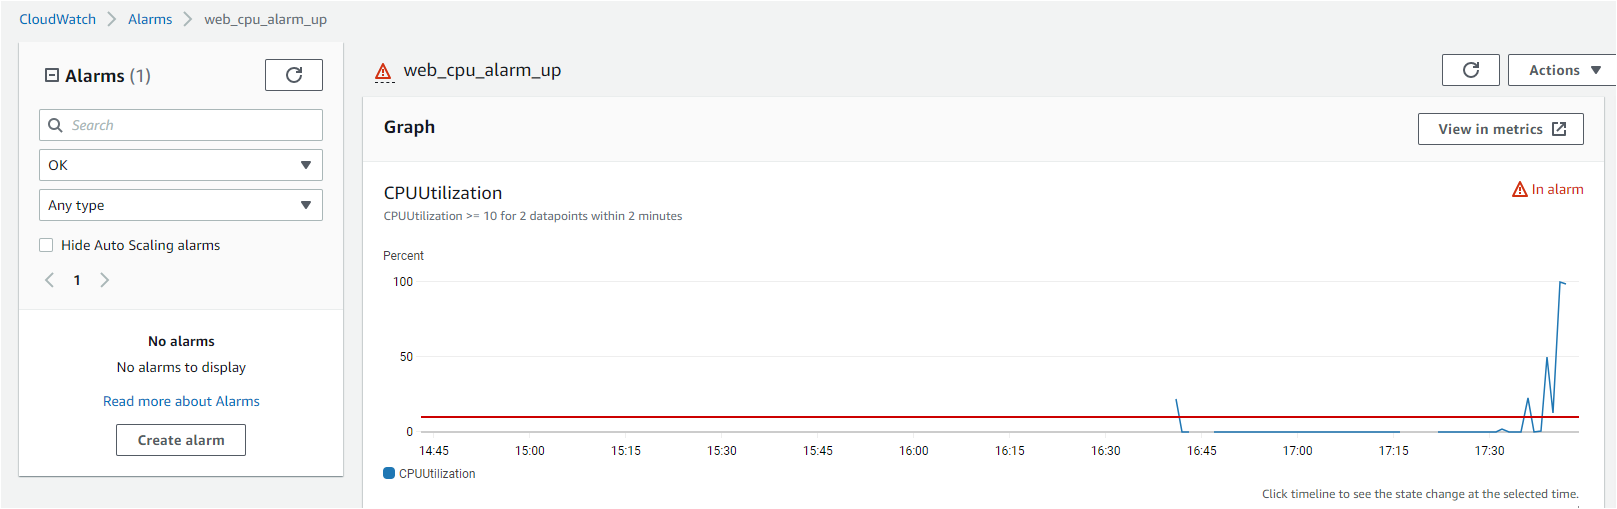 Viewing the Alarm Generated in the AWS CloudWatch Service